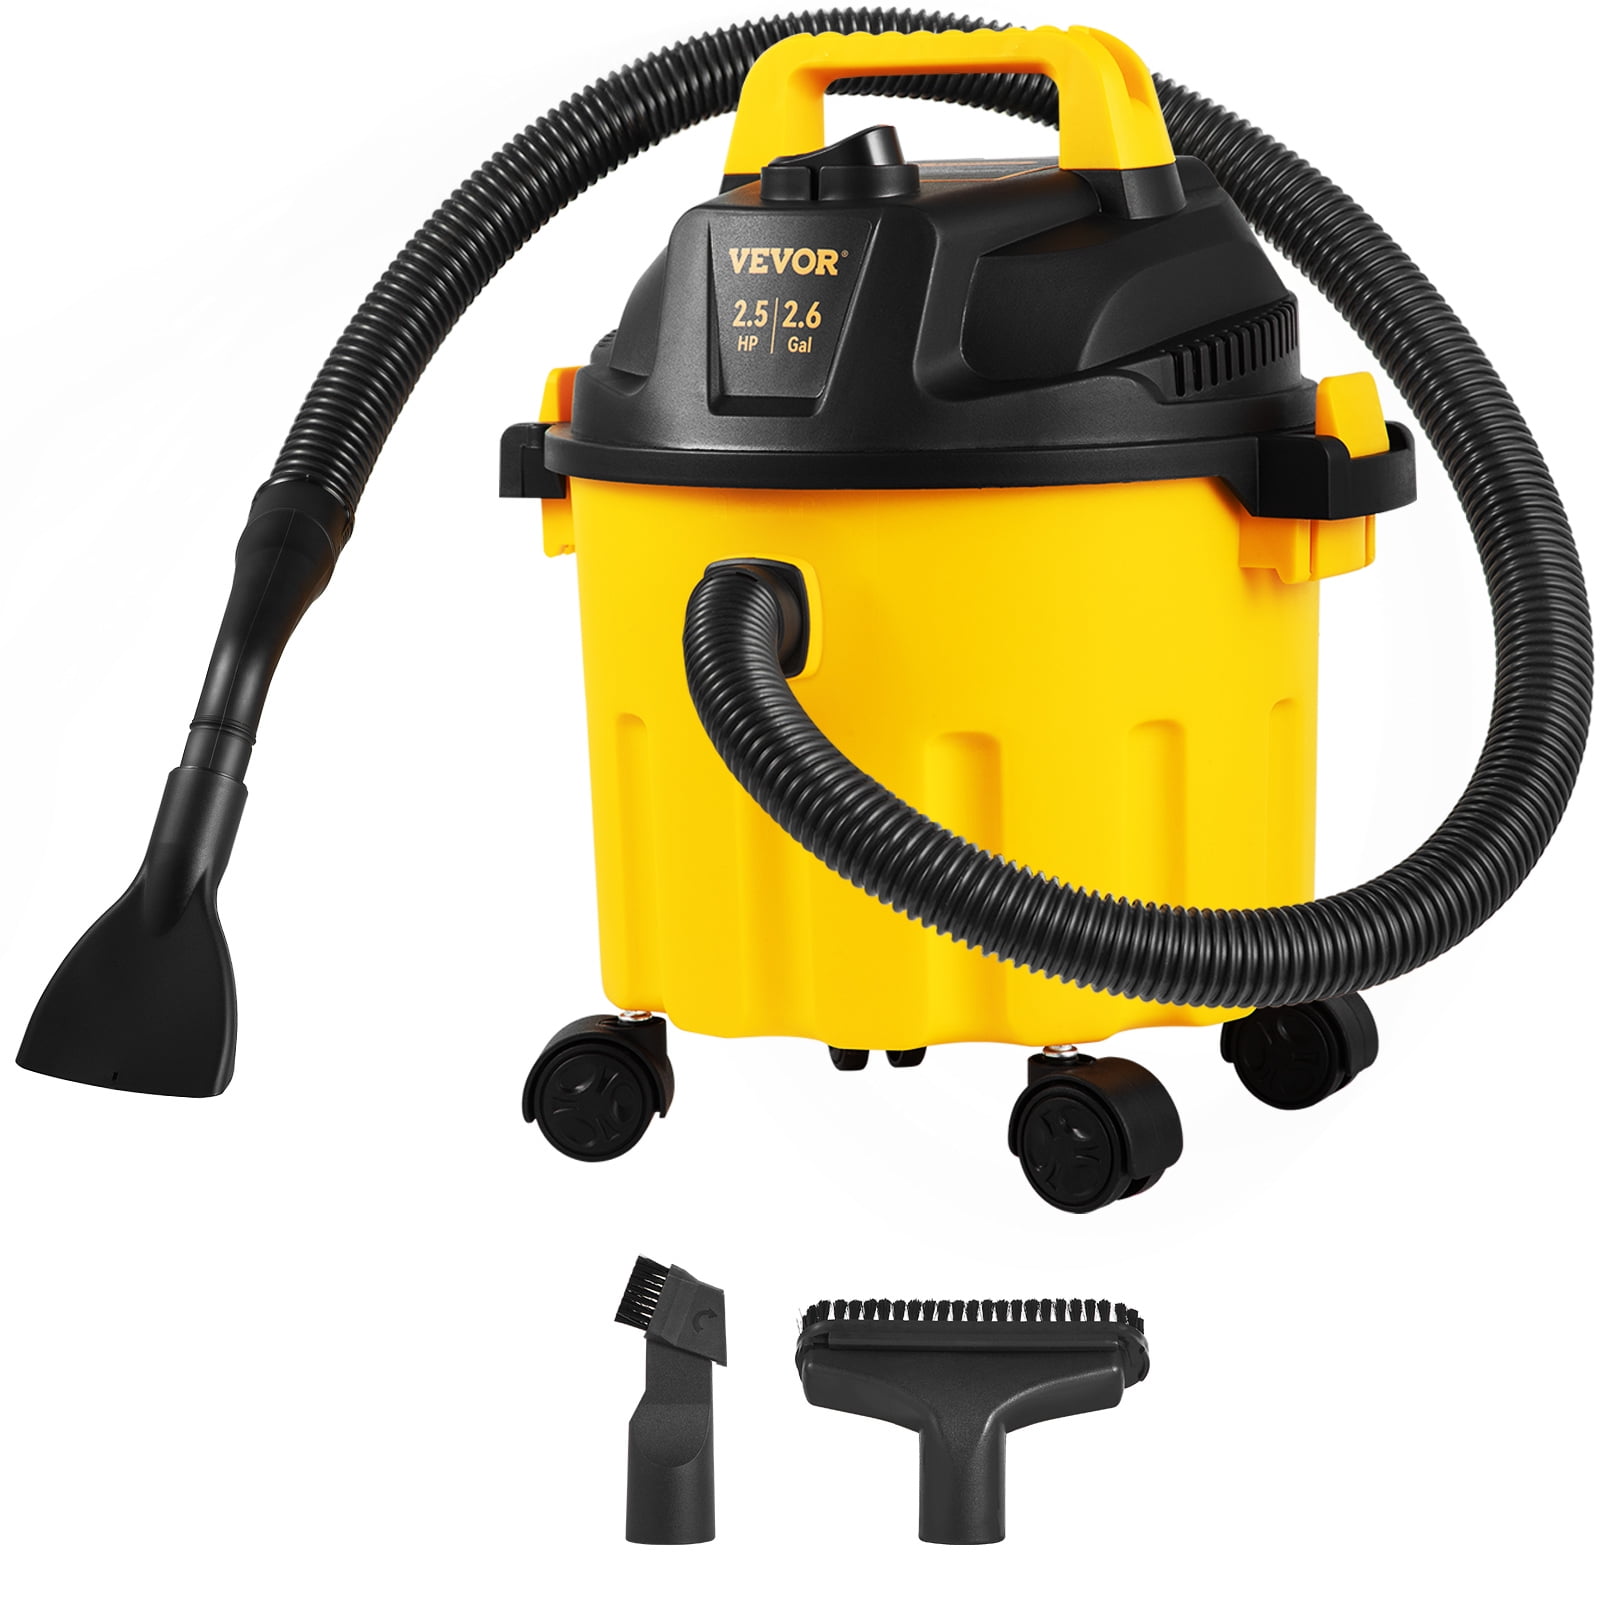  VEVOR Stainless Steel Wet Dry Shop Vacuum, 8 Gallon 6 Peak HP Wet/Dry  Vac, Powerful Suction with Blower Function with Attachments 2-in-1 Crevice  Nozzle, Small Shop Vac Perfect for Carpet Debris